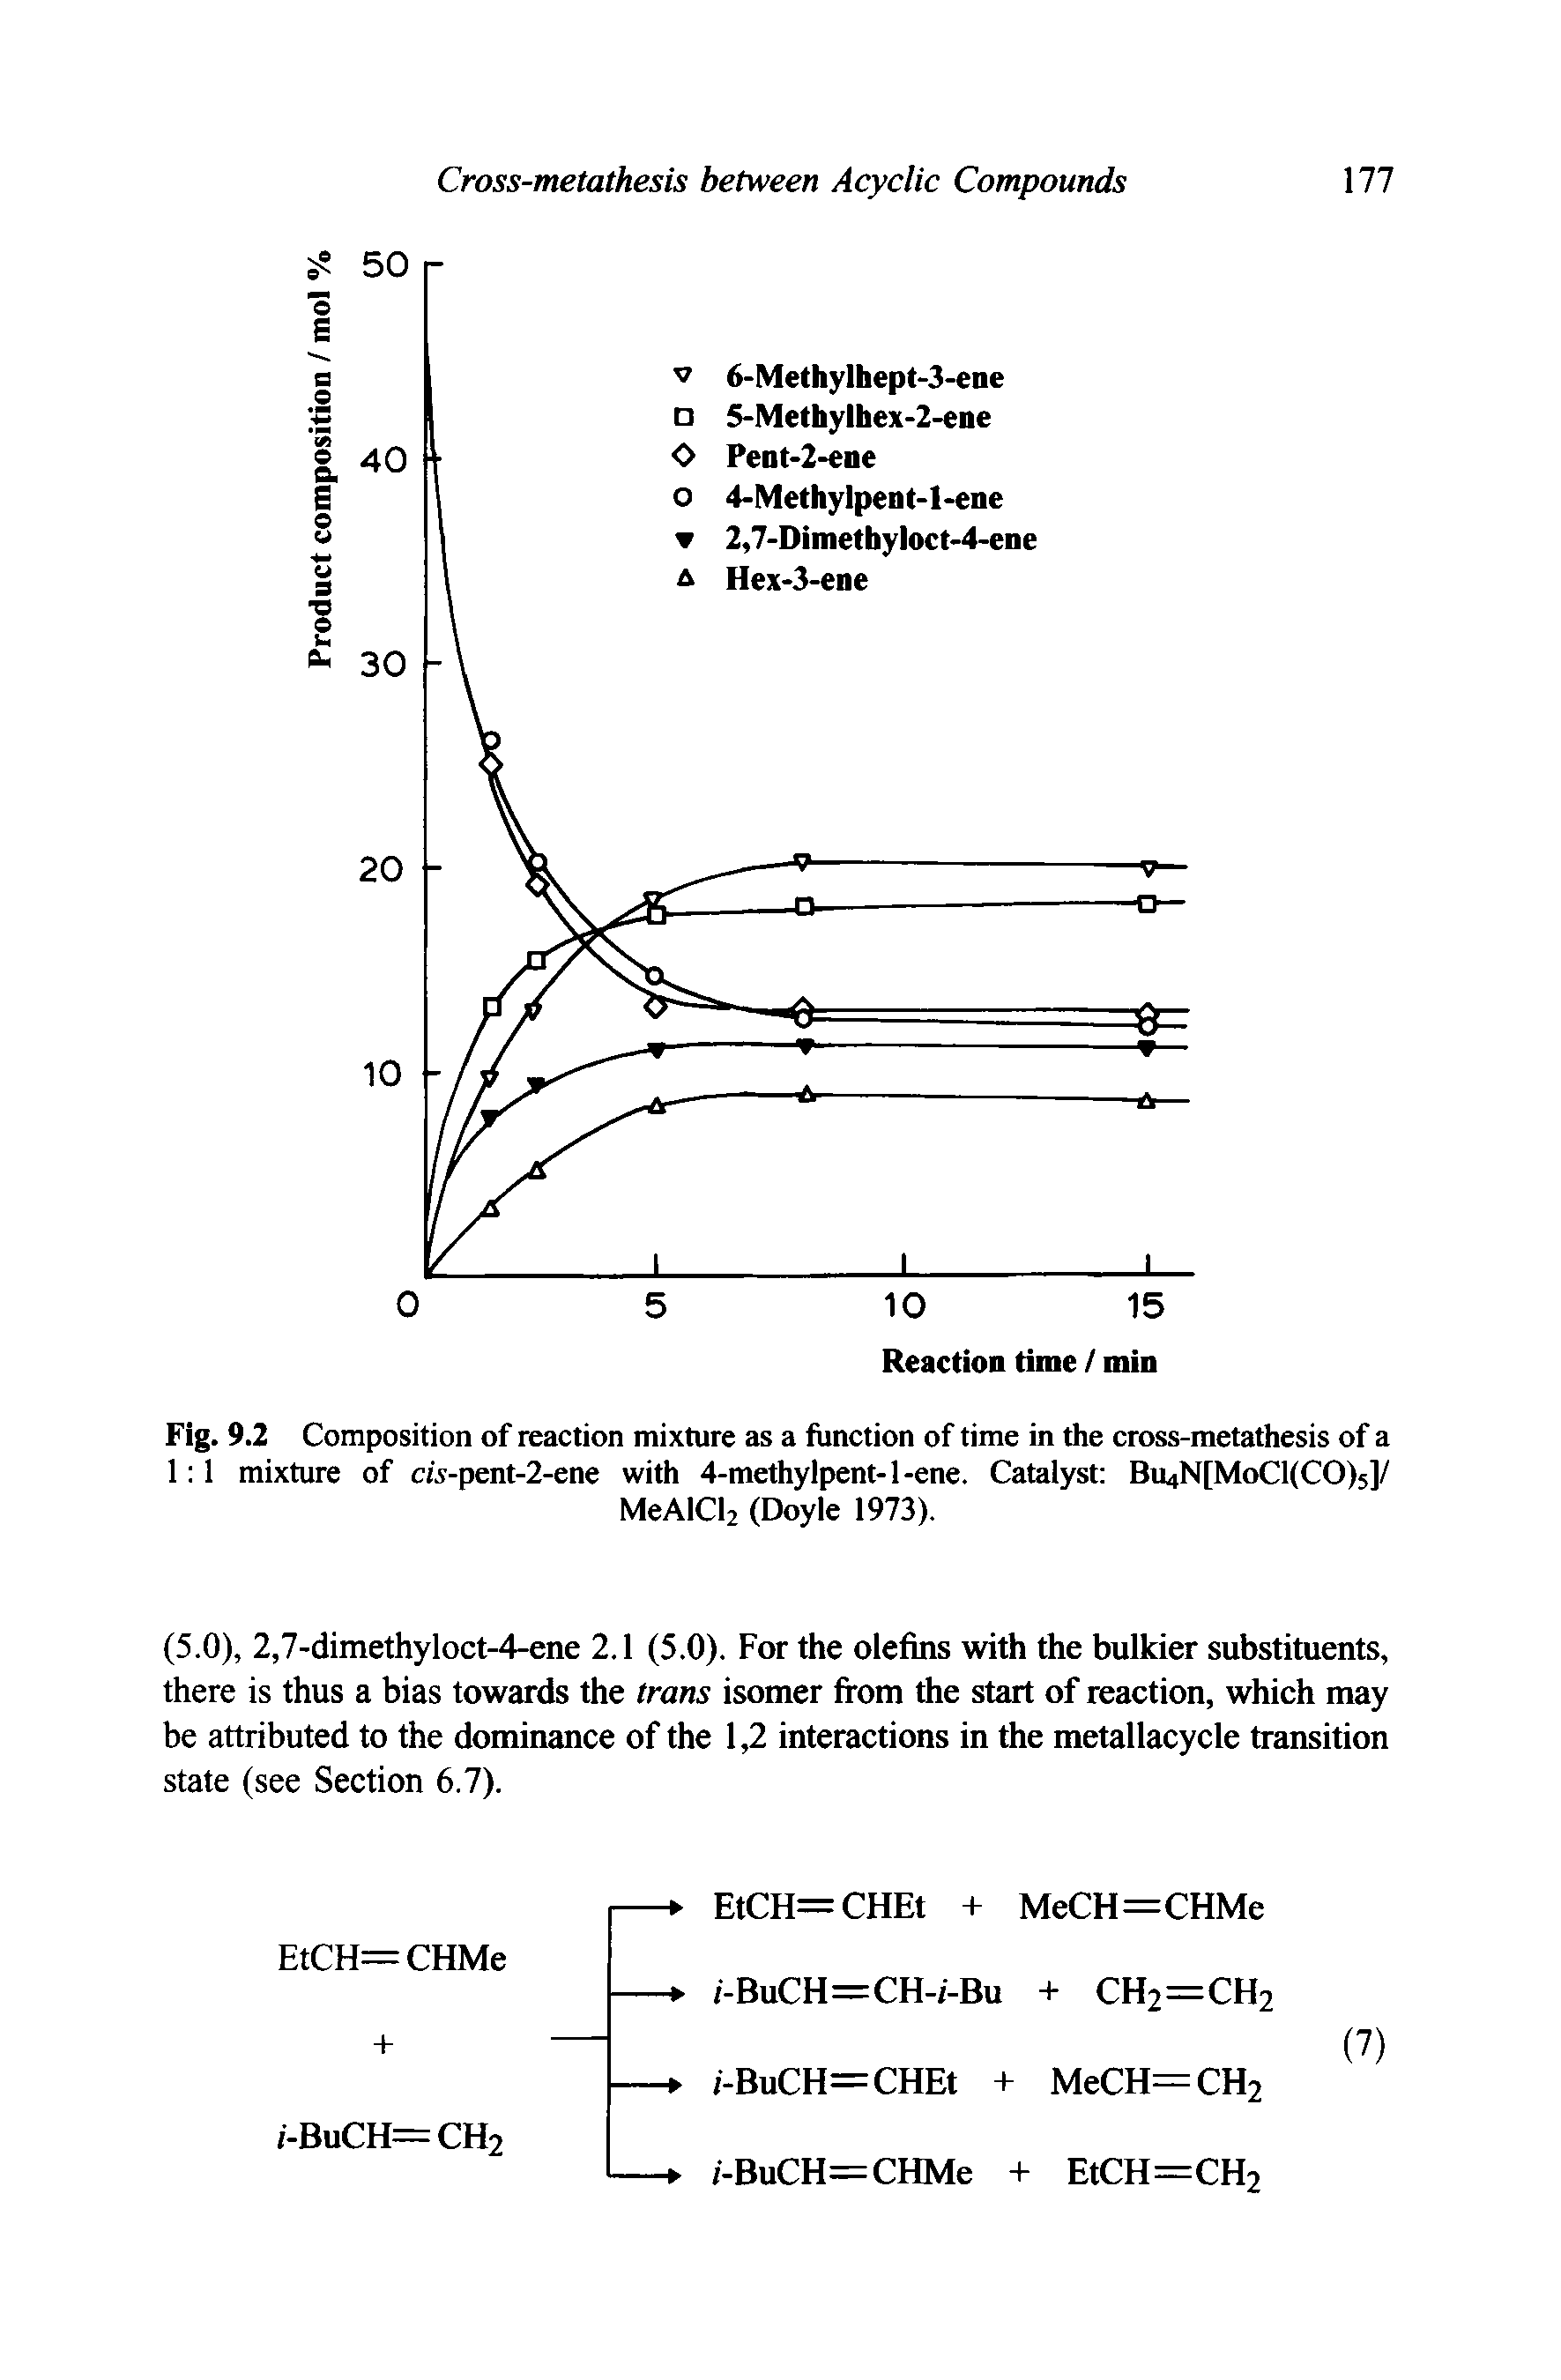 Fig. 9.2 Composition of reaction mixture as a function of time in the cross-metathesis of a 1 1 mixture of cw-pent-2-ene with 4-methylpent-l-ene. Catalyst Bu4N[MoCl(CO)5]/...